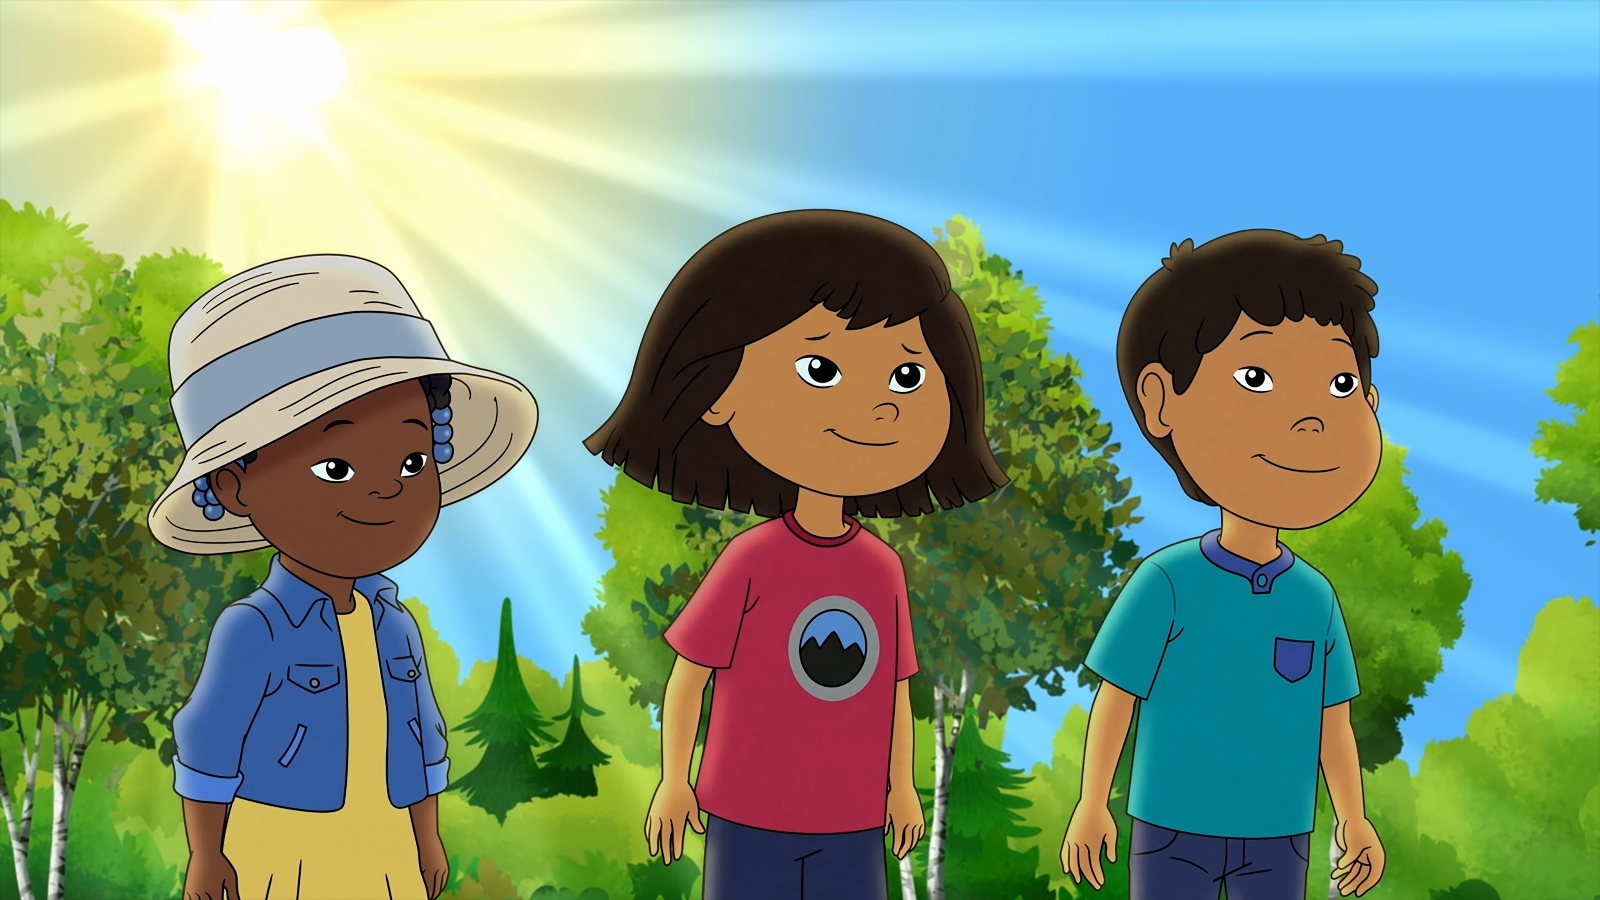 Three children cartoon characters stand in front of a blue sky.